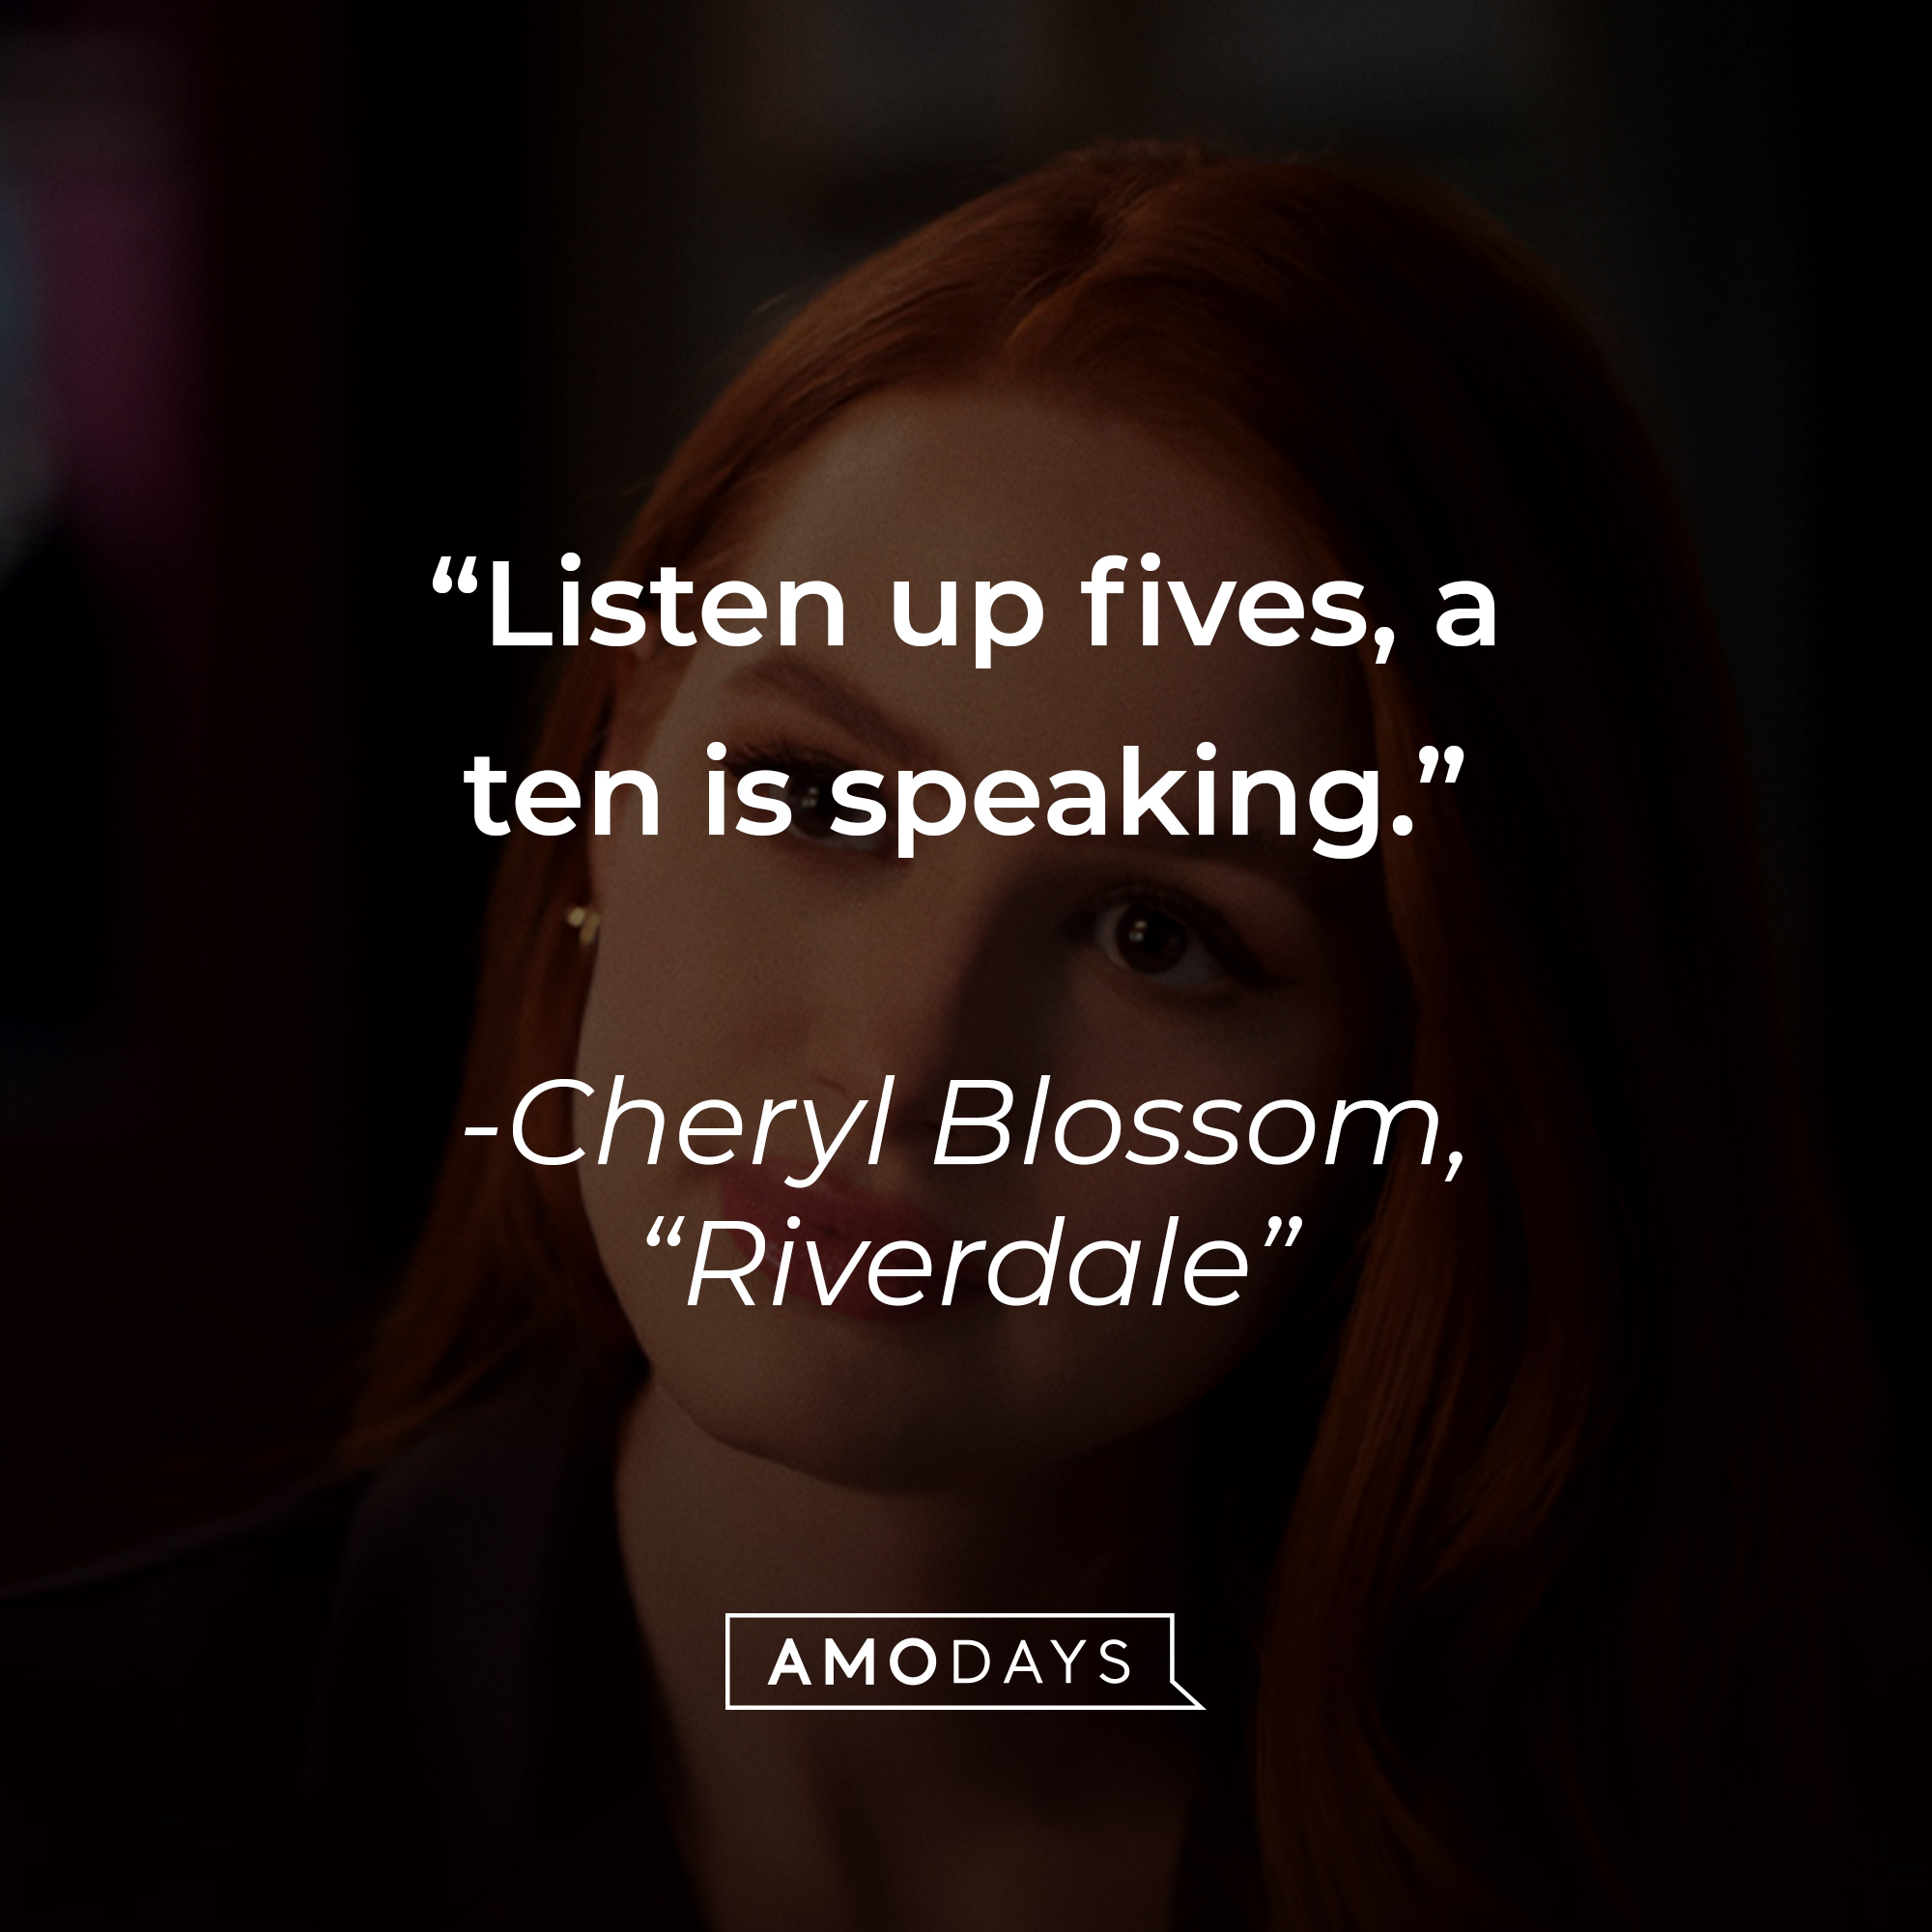 Cheryl Blossom with her quote: "Listen up fives, a ten is speaking.” | Source: Facebook.com/CWRiverdale